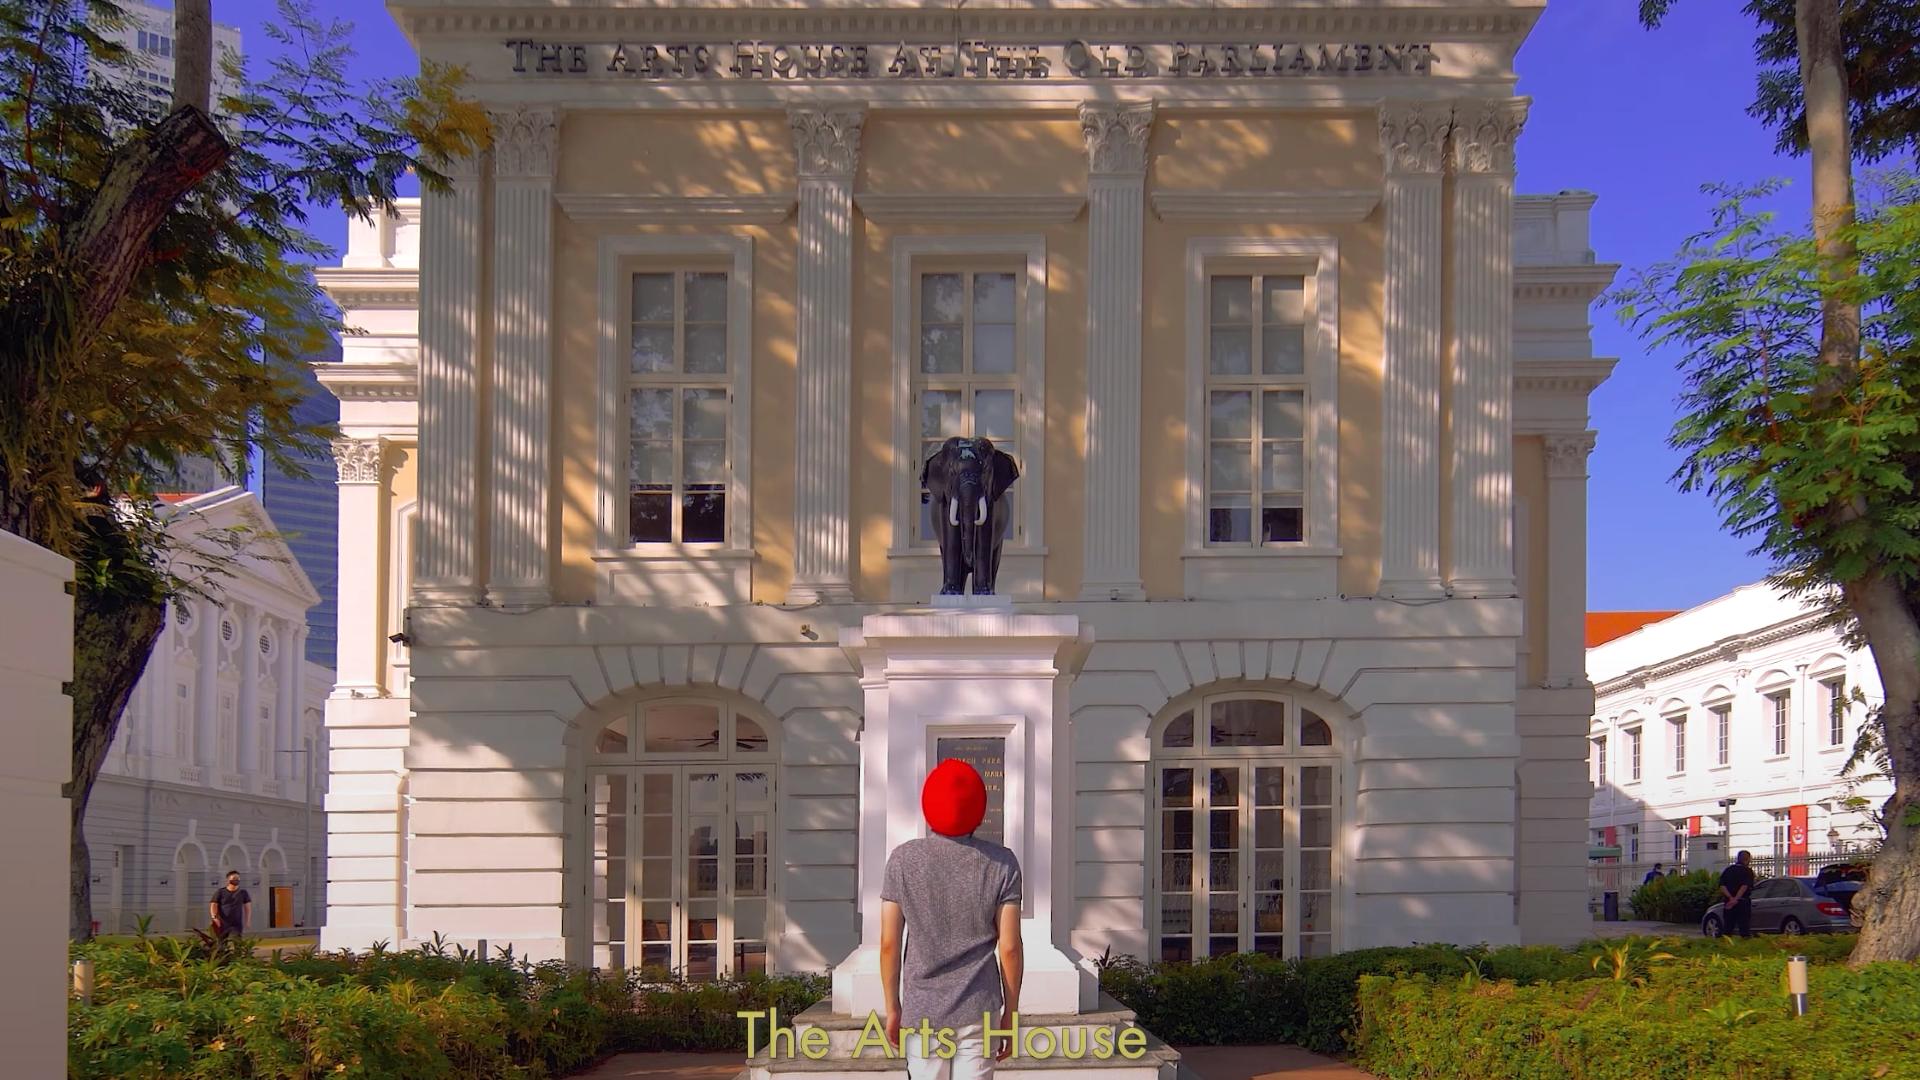 Wes Anderson's movies and architecture: A delightful blend of